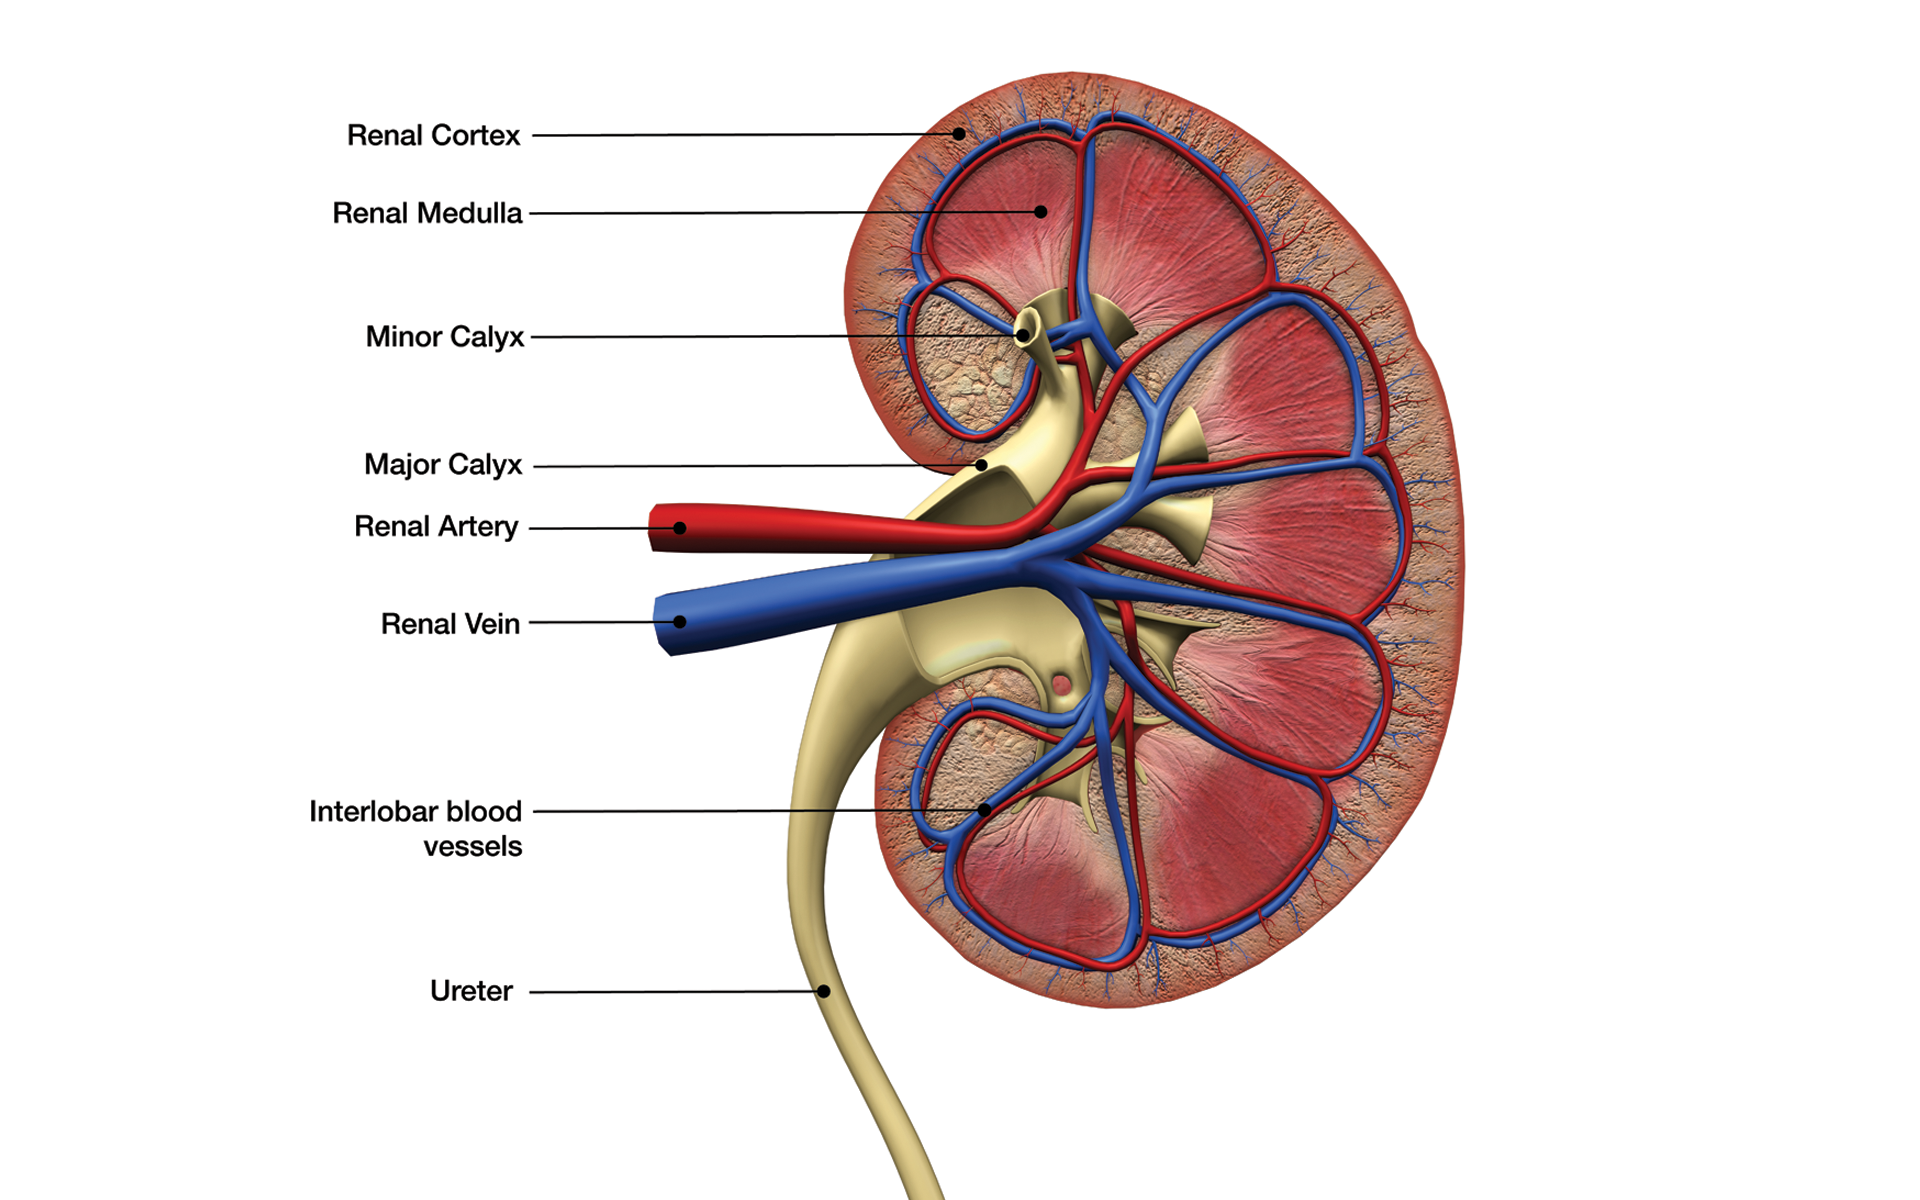 The Kidney – Our Underrated Organ